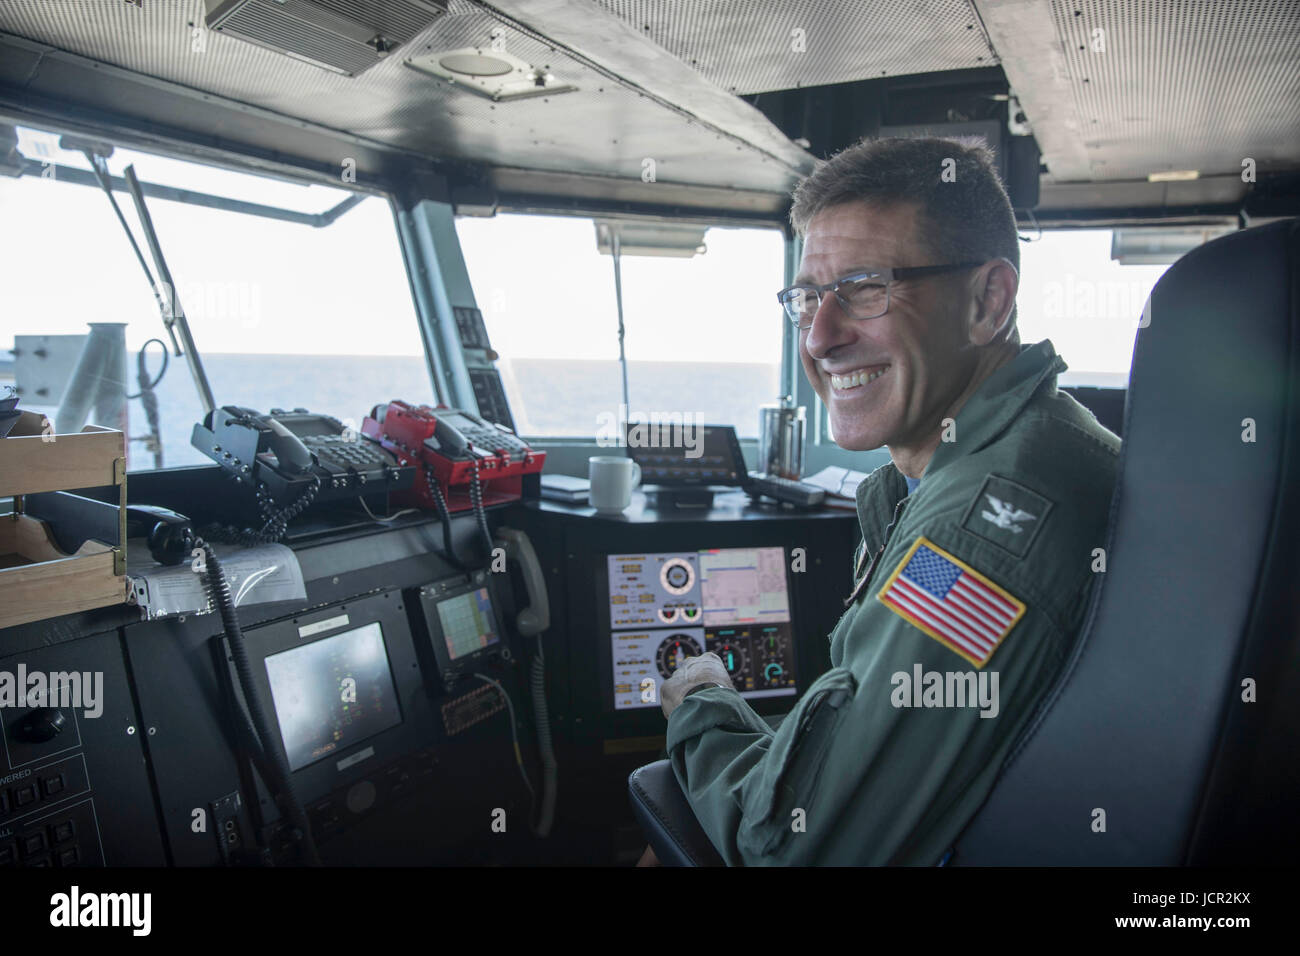 USS Abraham Lincoln Commanding Officer Putnam Browne smiles after he successful tried his hand at using the aircraft capture system on the flight deck of the USN Nimitz-class aircraft carrier USS Abraham Lincoln June 3, 2017 in the Atlantic Ocean. Stock Photo